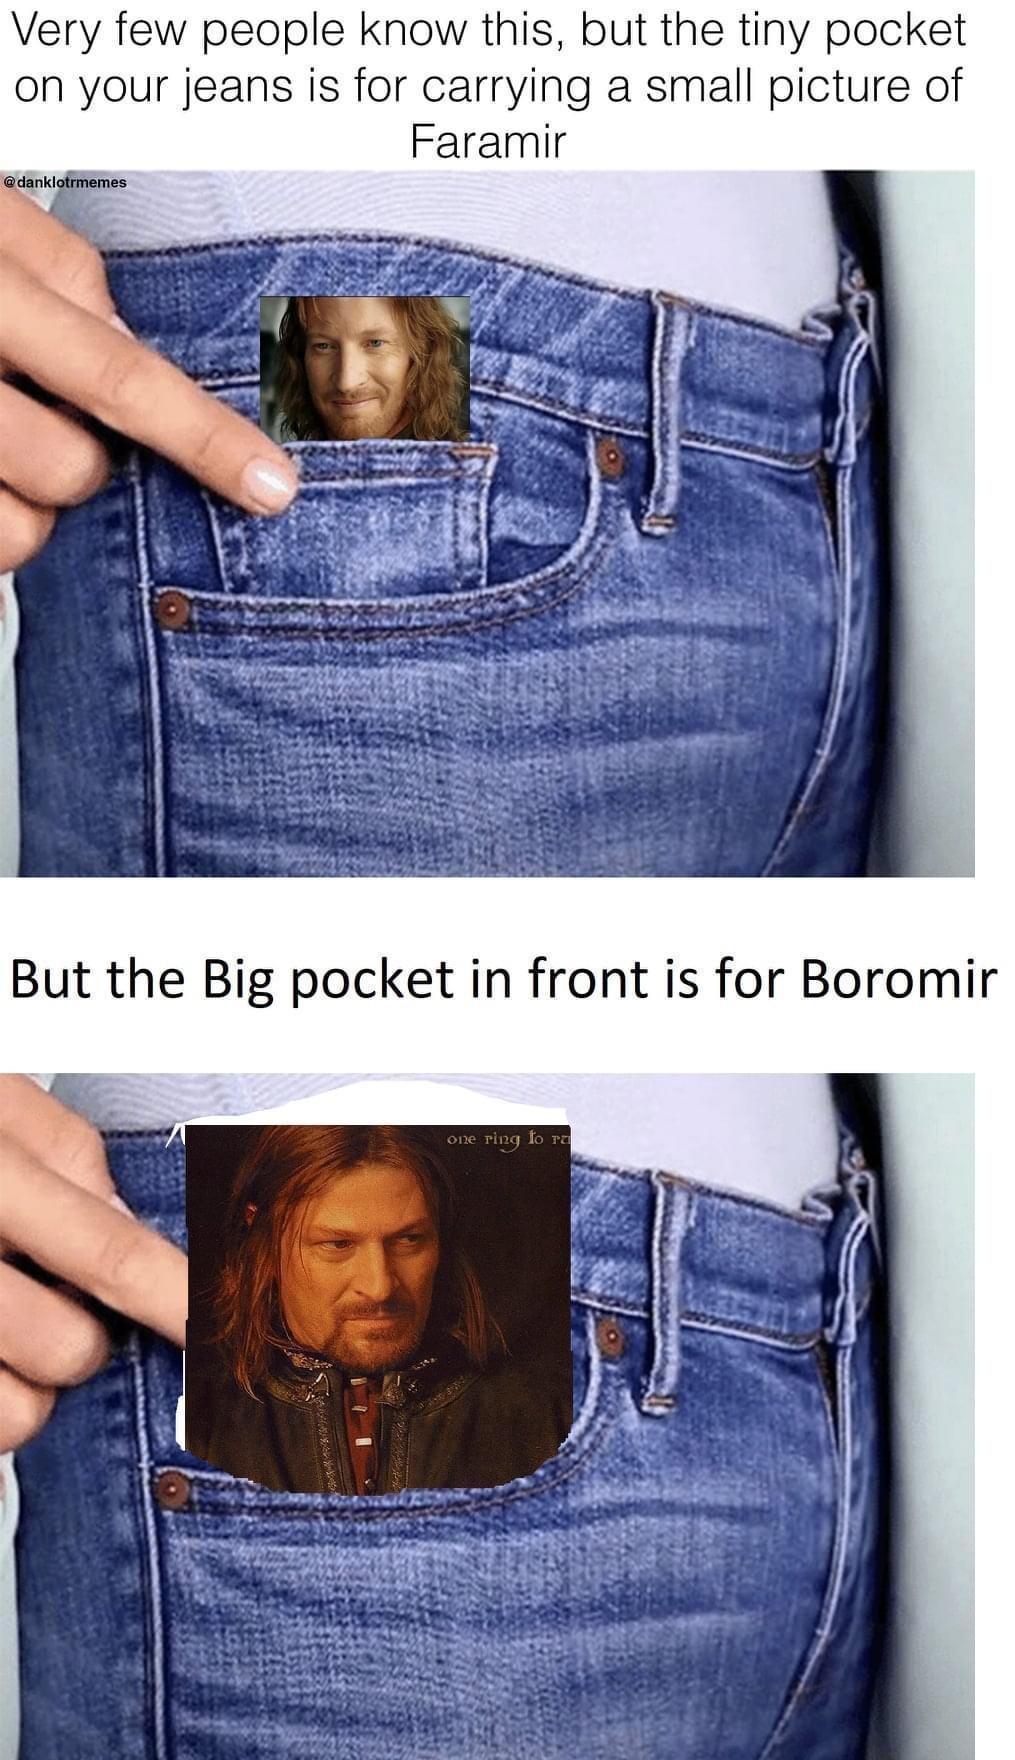 dank memes - tiny pocket meme - Very few people know this, but the tiny pocket on your jeans is for carrying a small picture of Faramir But the Big pocket in front is for Boromir one ring to ra